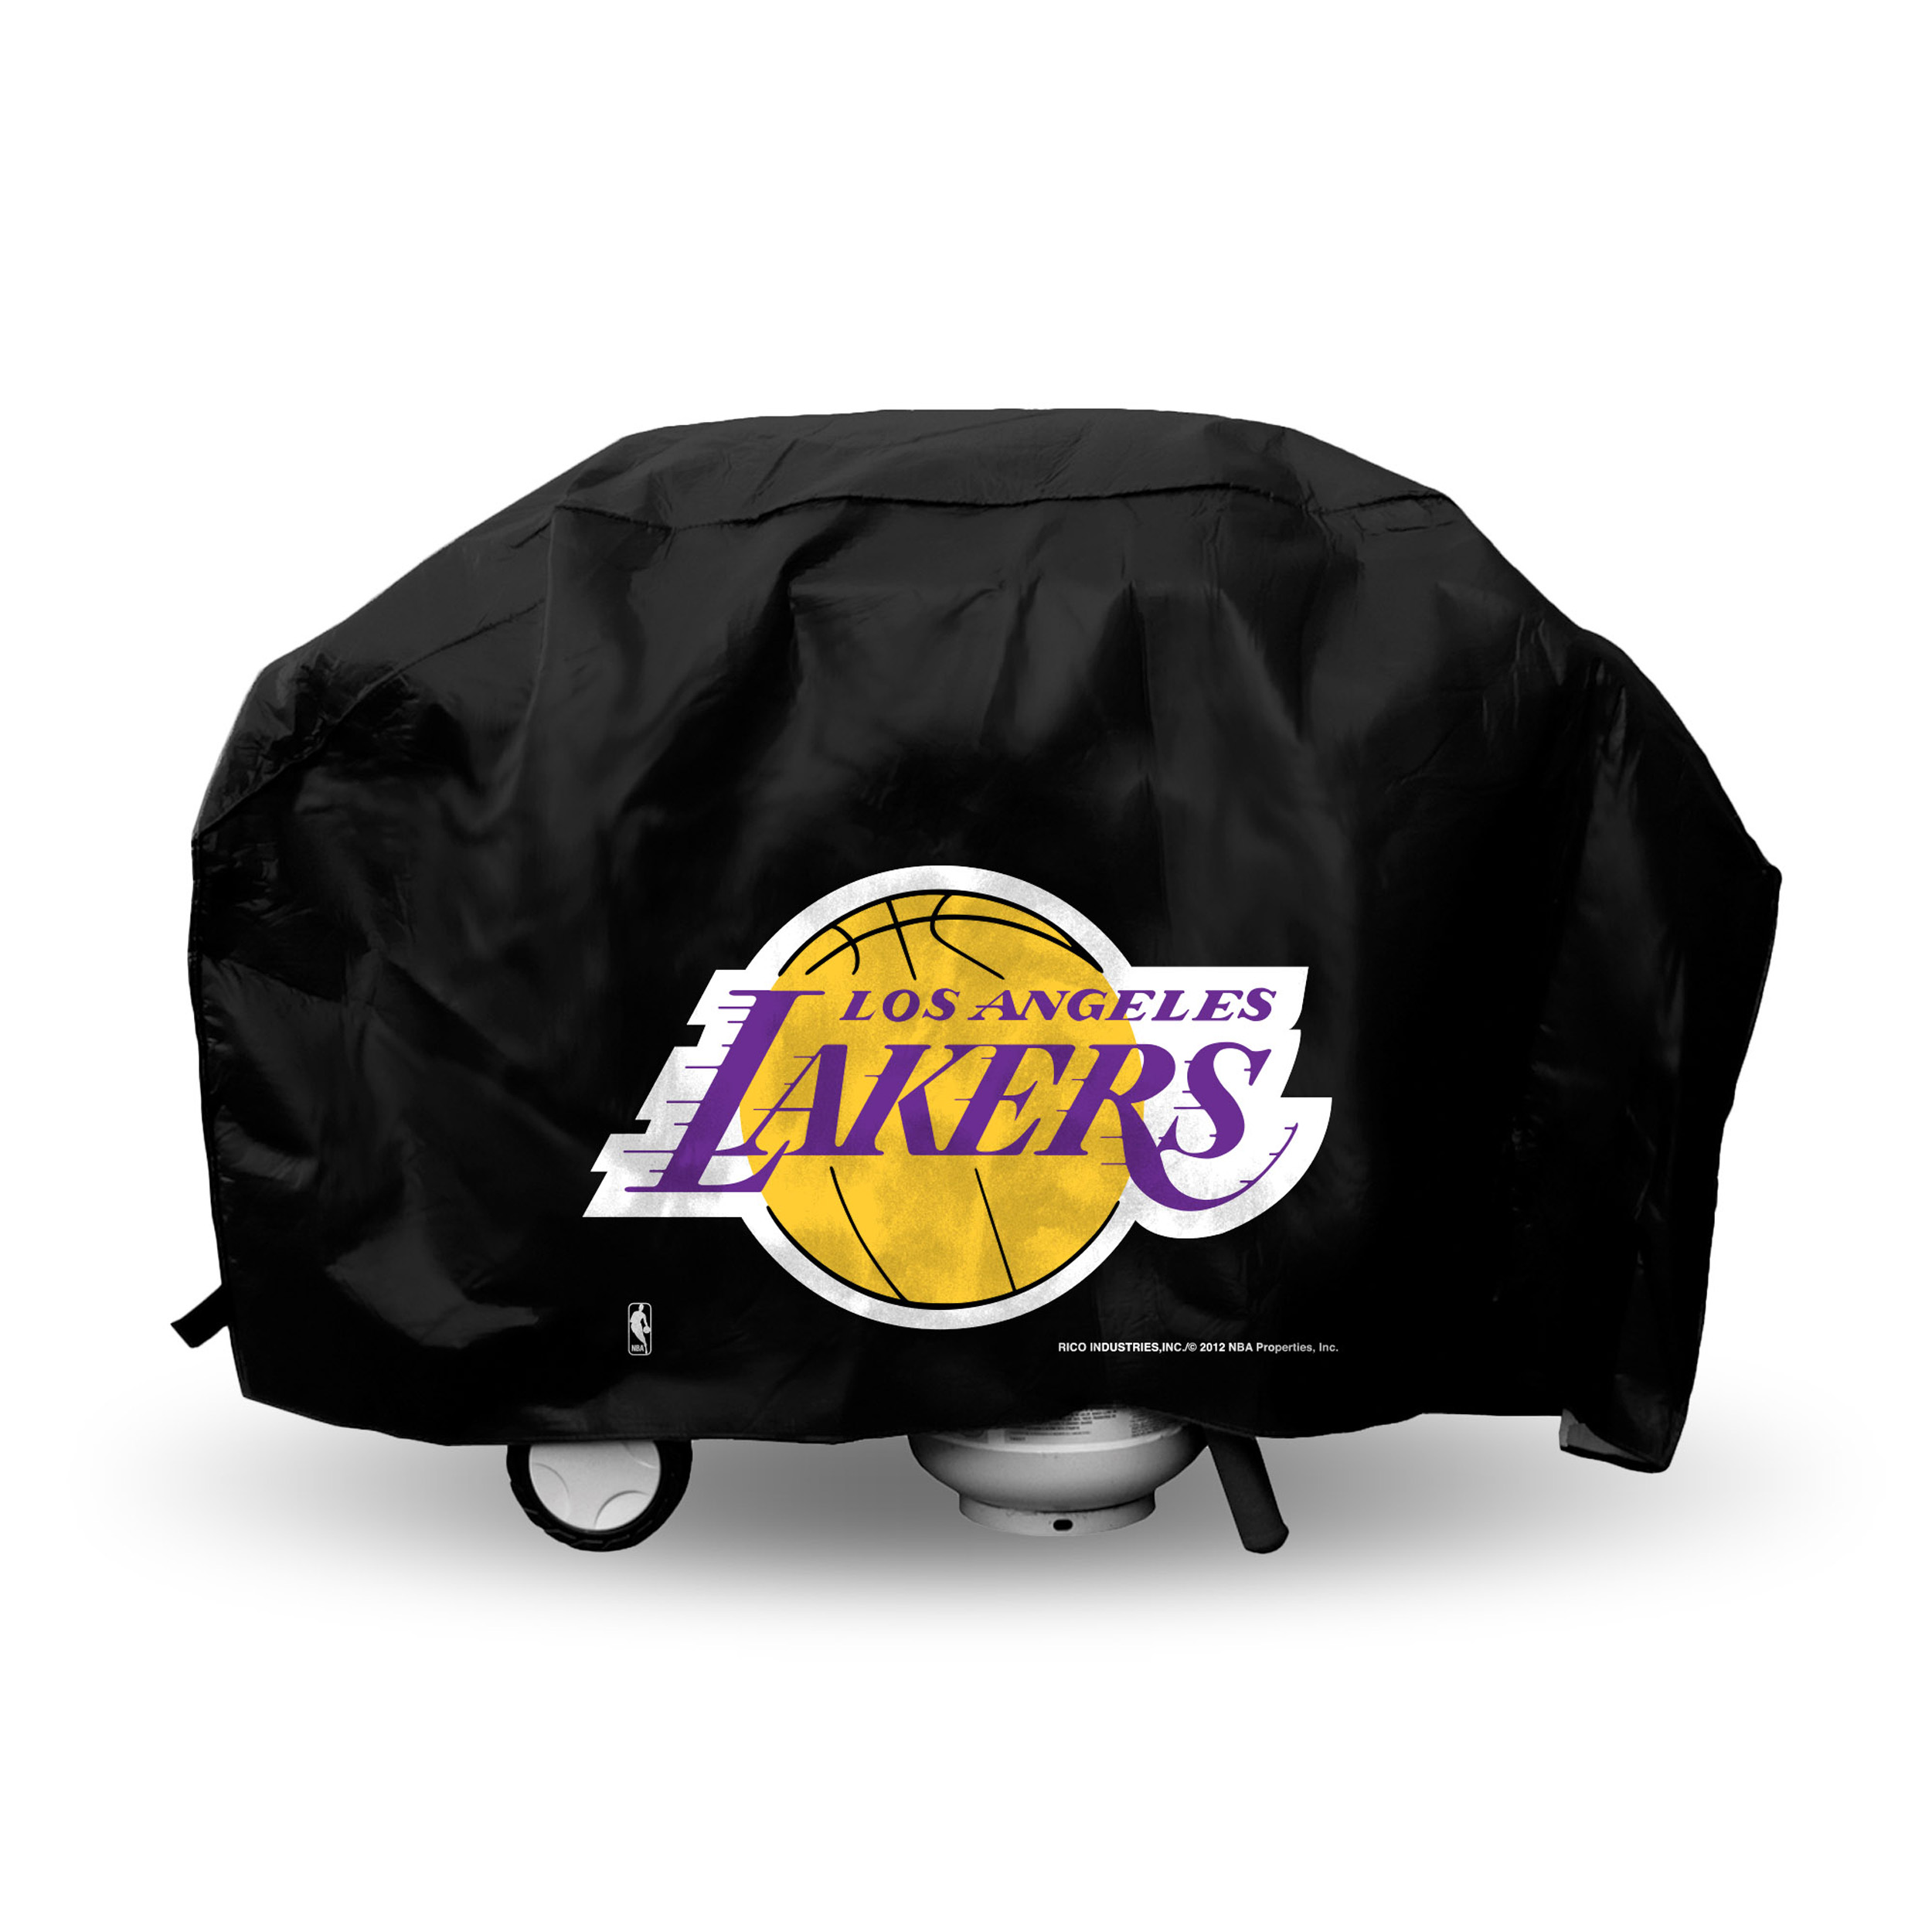 Rico Industries NBA - Economy Grill Cover, Los Angeles Lakers - image 1 of 2